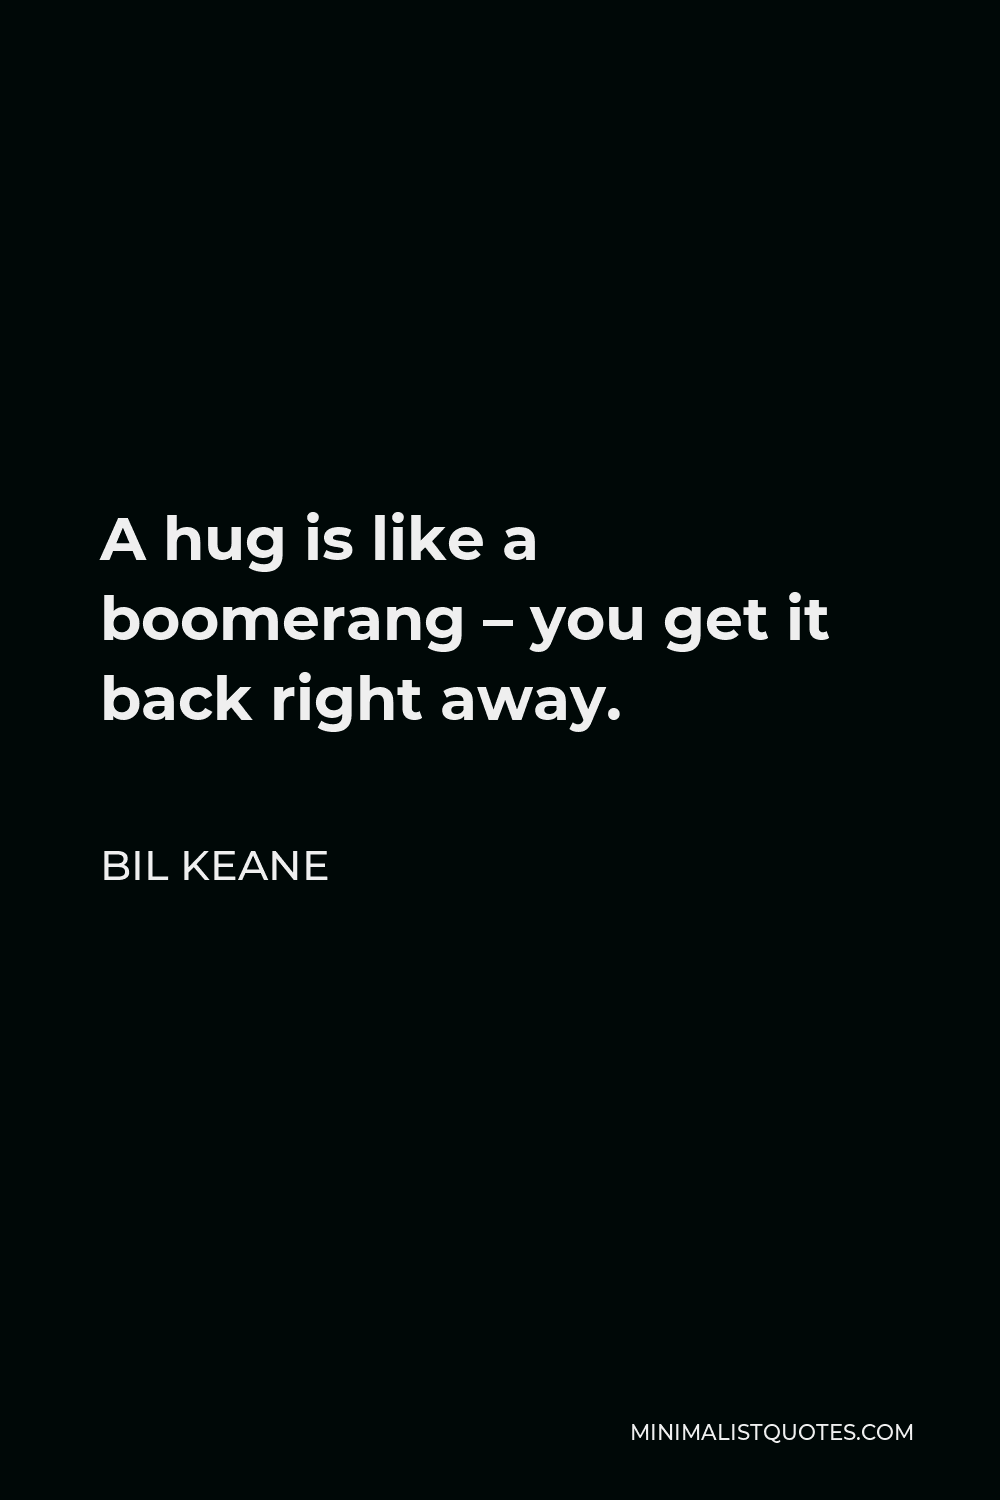 Bil Keane Quote - A hug is like a boomerang – you get it back right away.